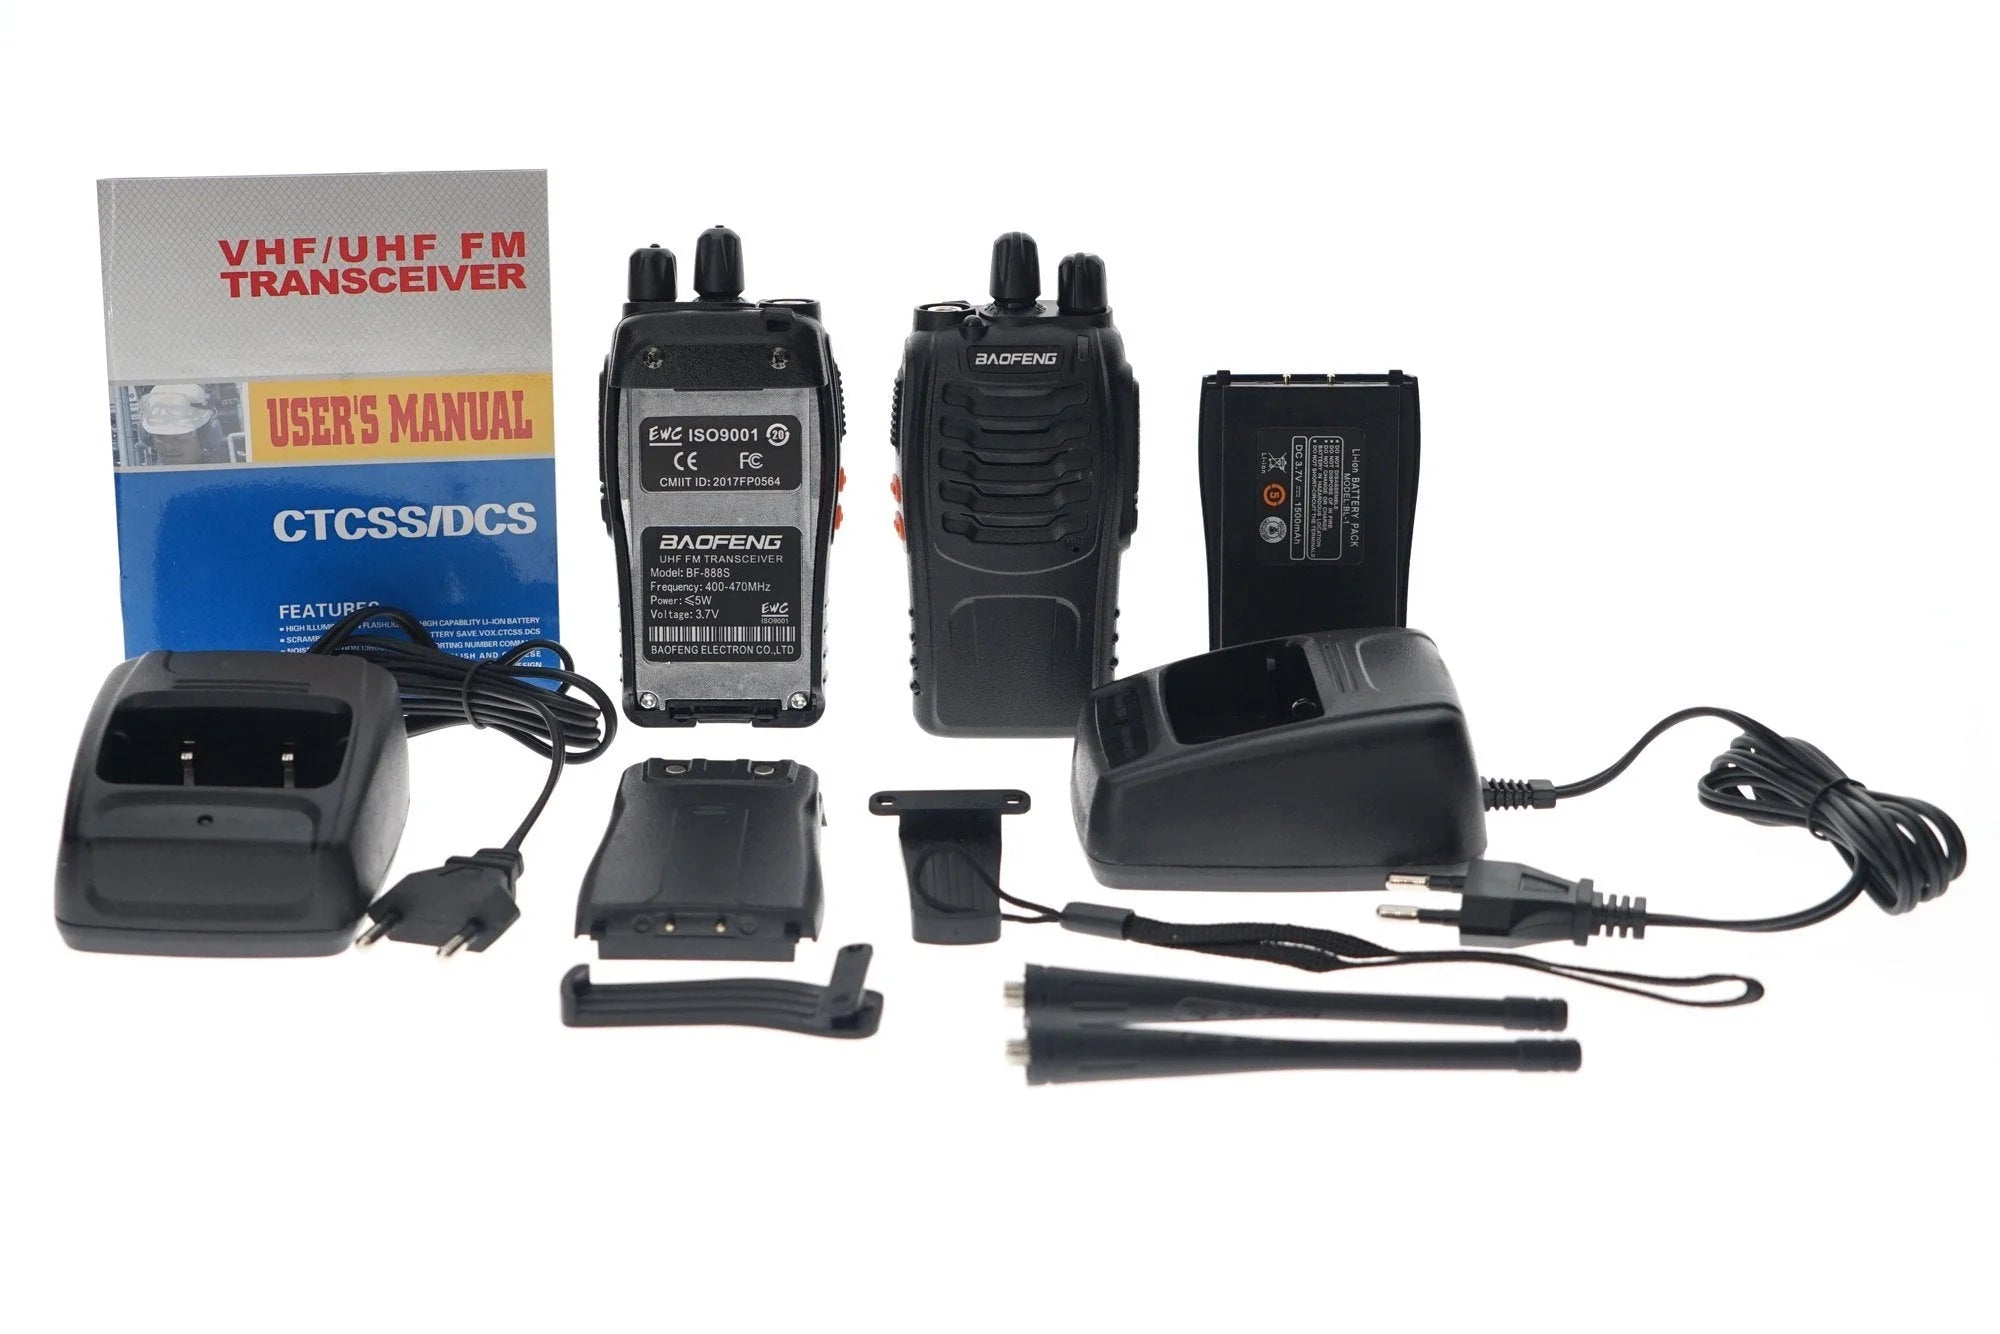 Walkie Talkies Handheld Two Way Radios Battery and Charger Baofeng Wide Communication Range - Al Ghani Stores